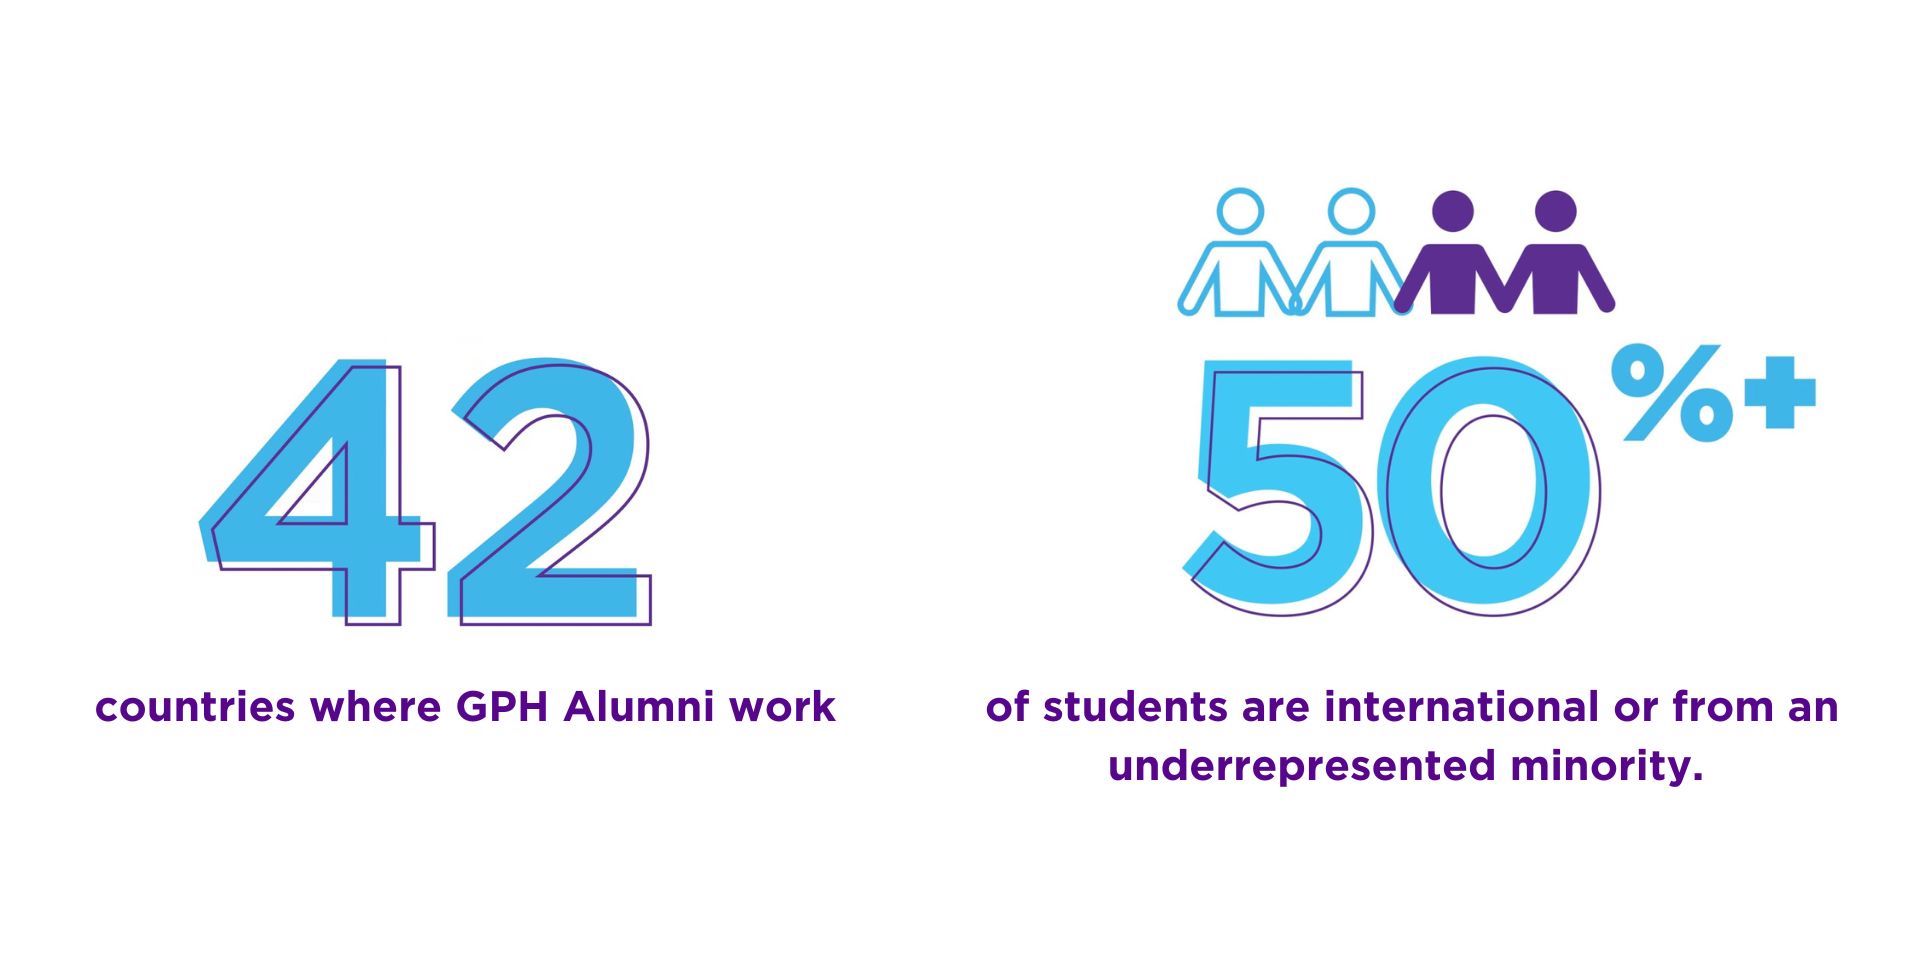 42 countries where GPH alumni work; more than 50% of students are international or from an underrepresented minority